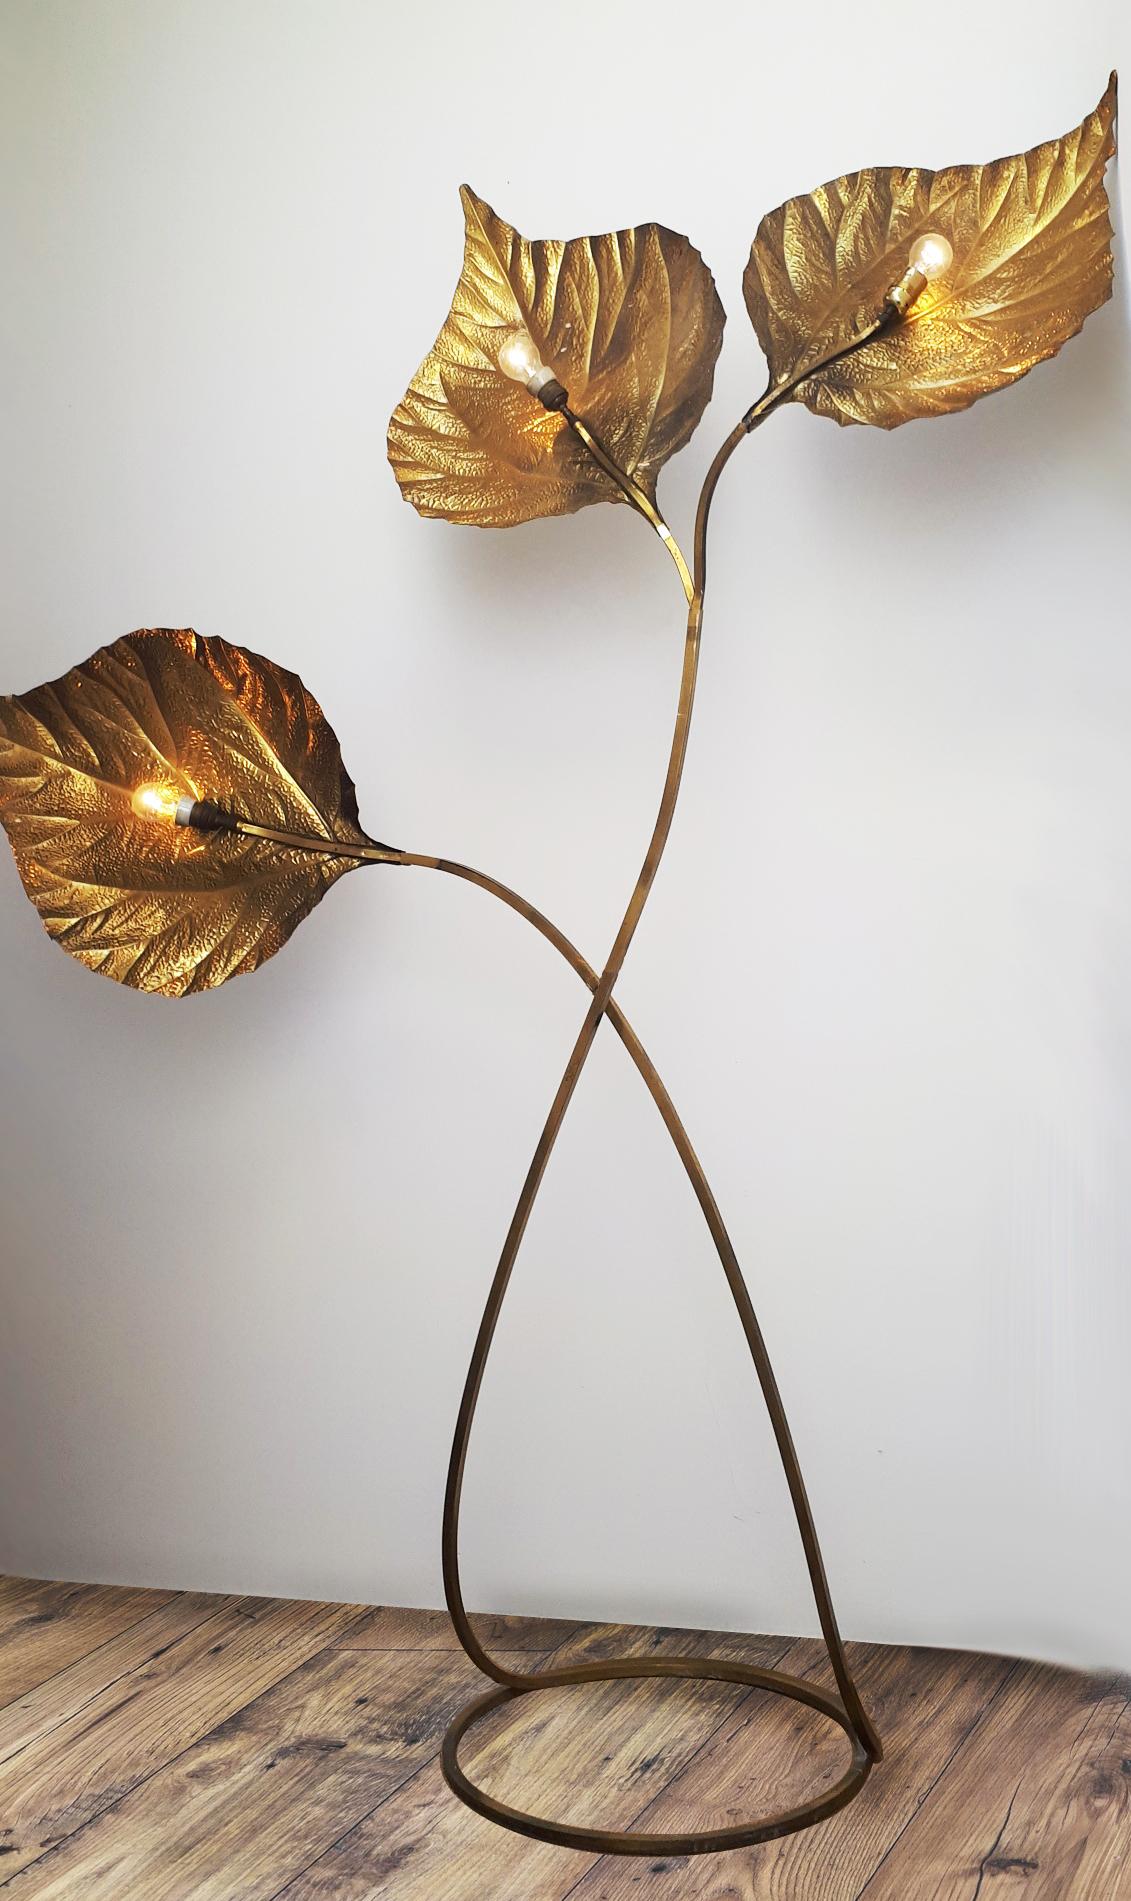 Extraordinary large three rhubarb leaves floor lamp designed by Tomasso Barbi from the 1970s. The lamp is made of polished brass, has a bend base with beautiful patterned leaves which create a warm and inviting atmosphere when the lights reflect on